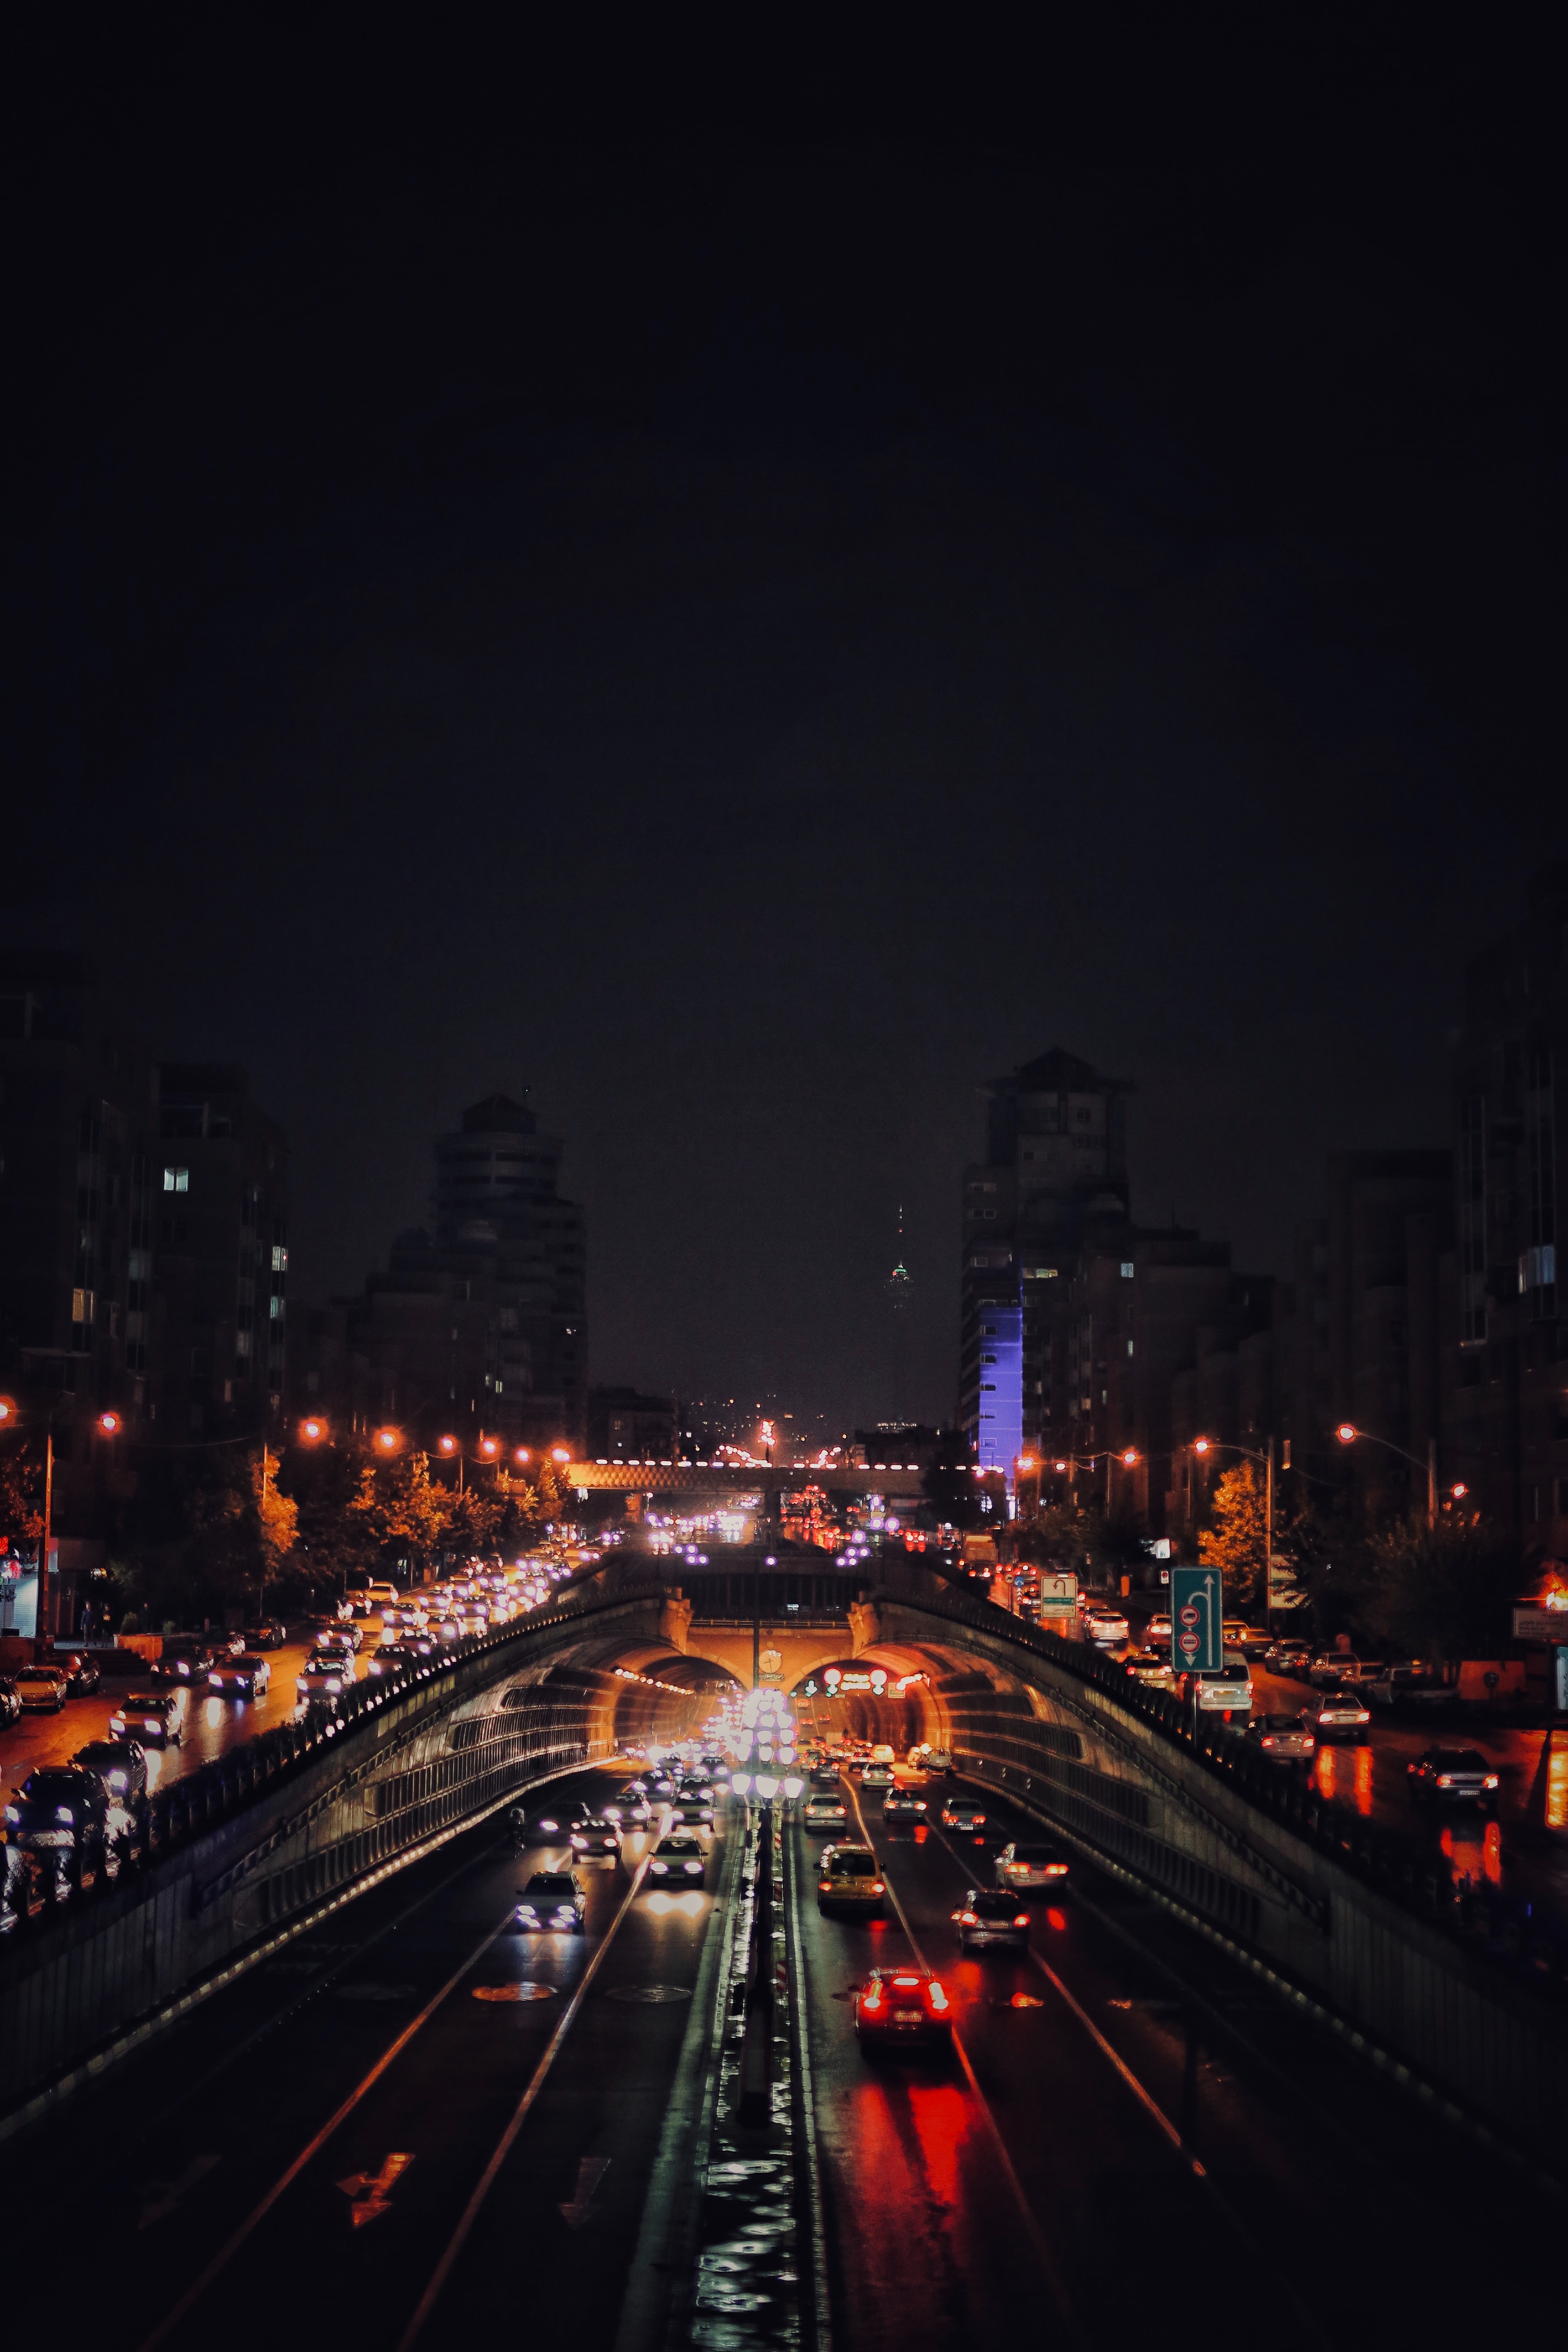 Download wallpaper 3840x5760 night city, road, cars, lights hd background